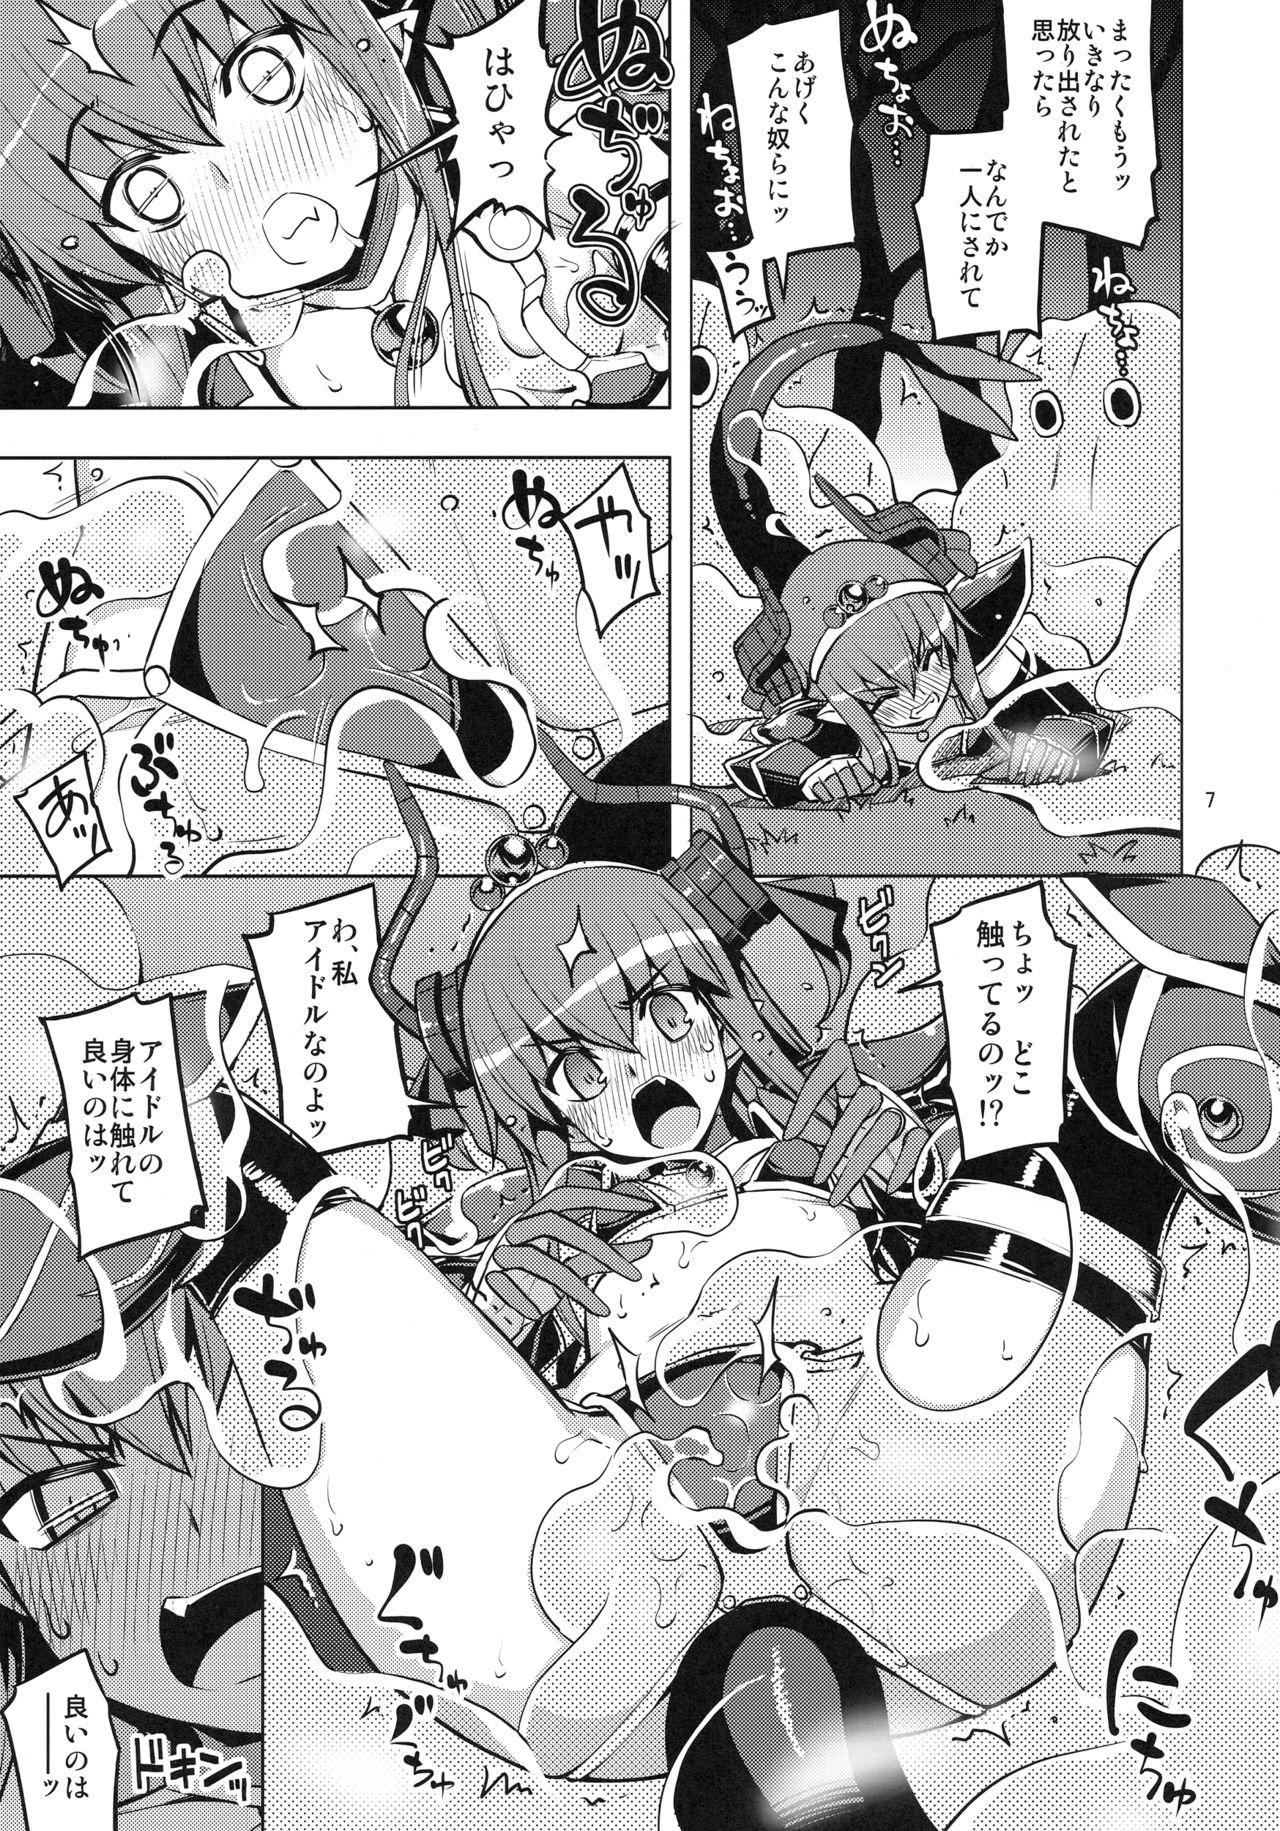 Blowing RE24 - Fate grand order Deflowered - Page 6